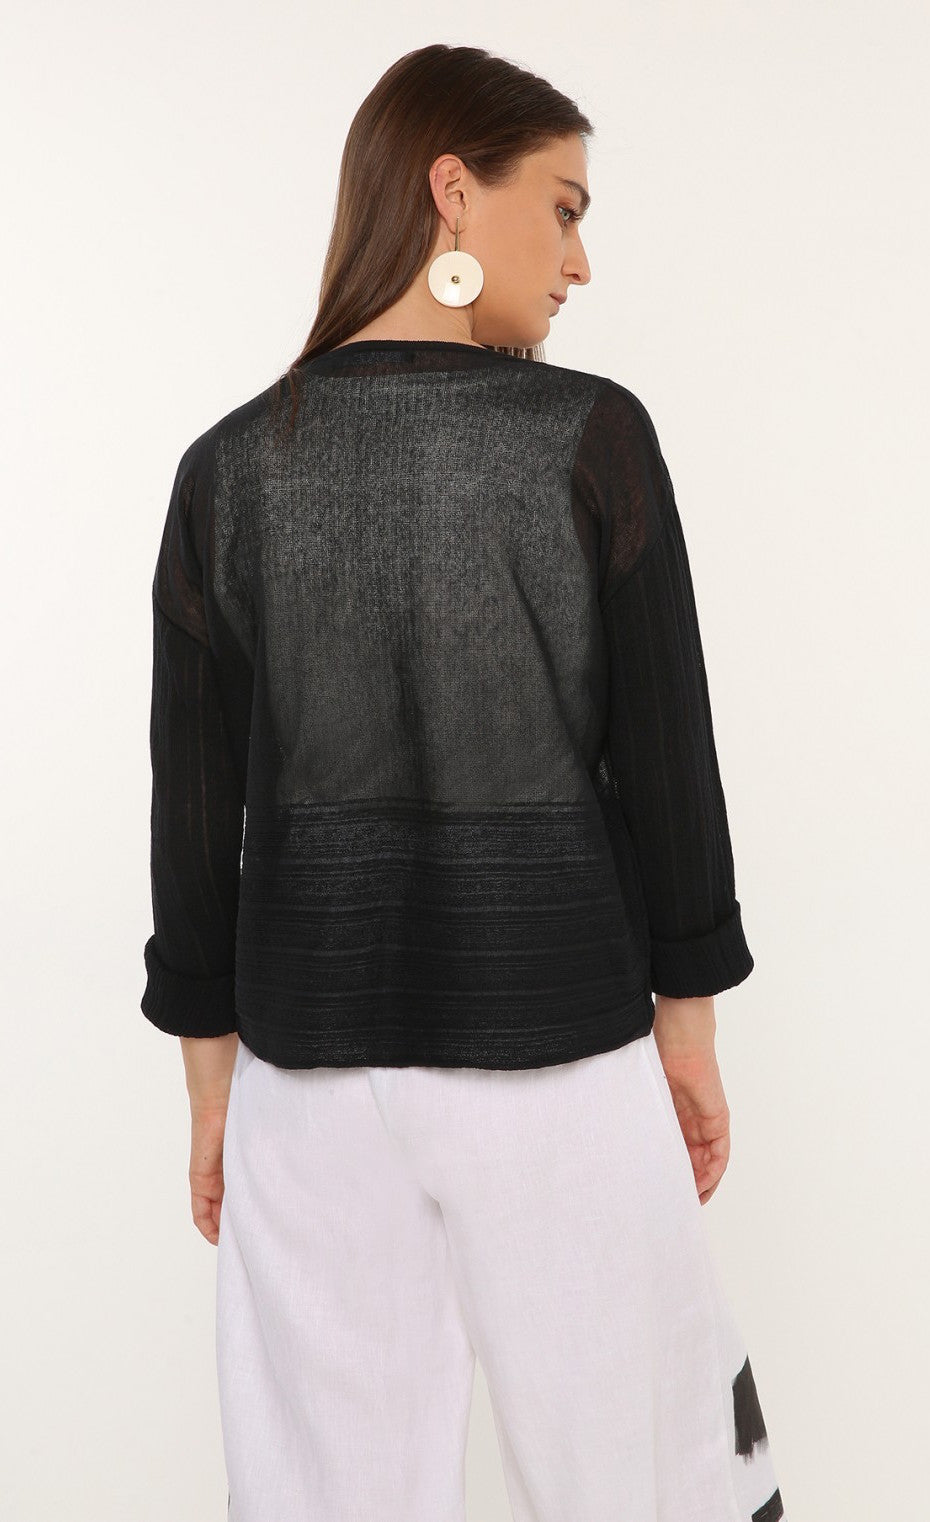 Back top half view of a woman wearing the ozai n ku mimosa knit top. This top is black and translucent. It has a darker pattern running across the bottom of the back and on the long sleeves. 